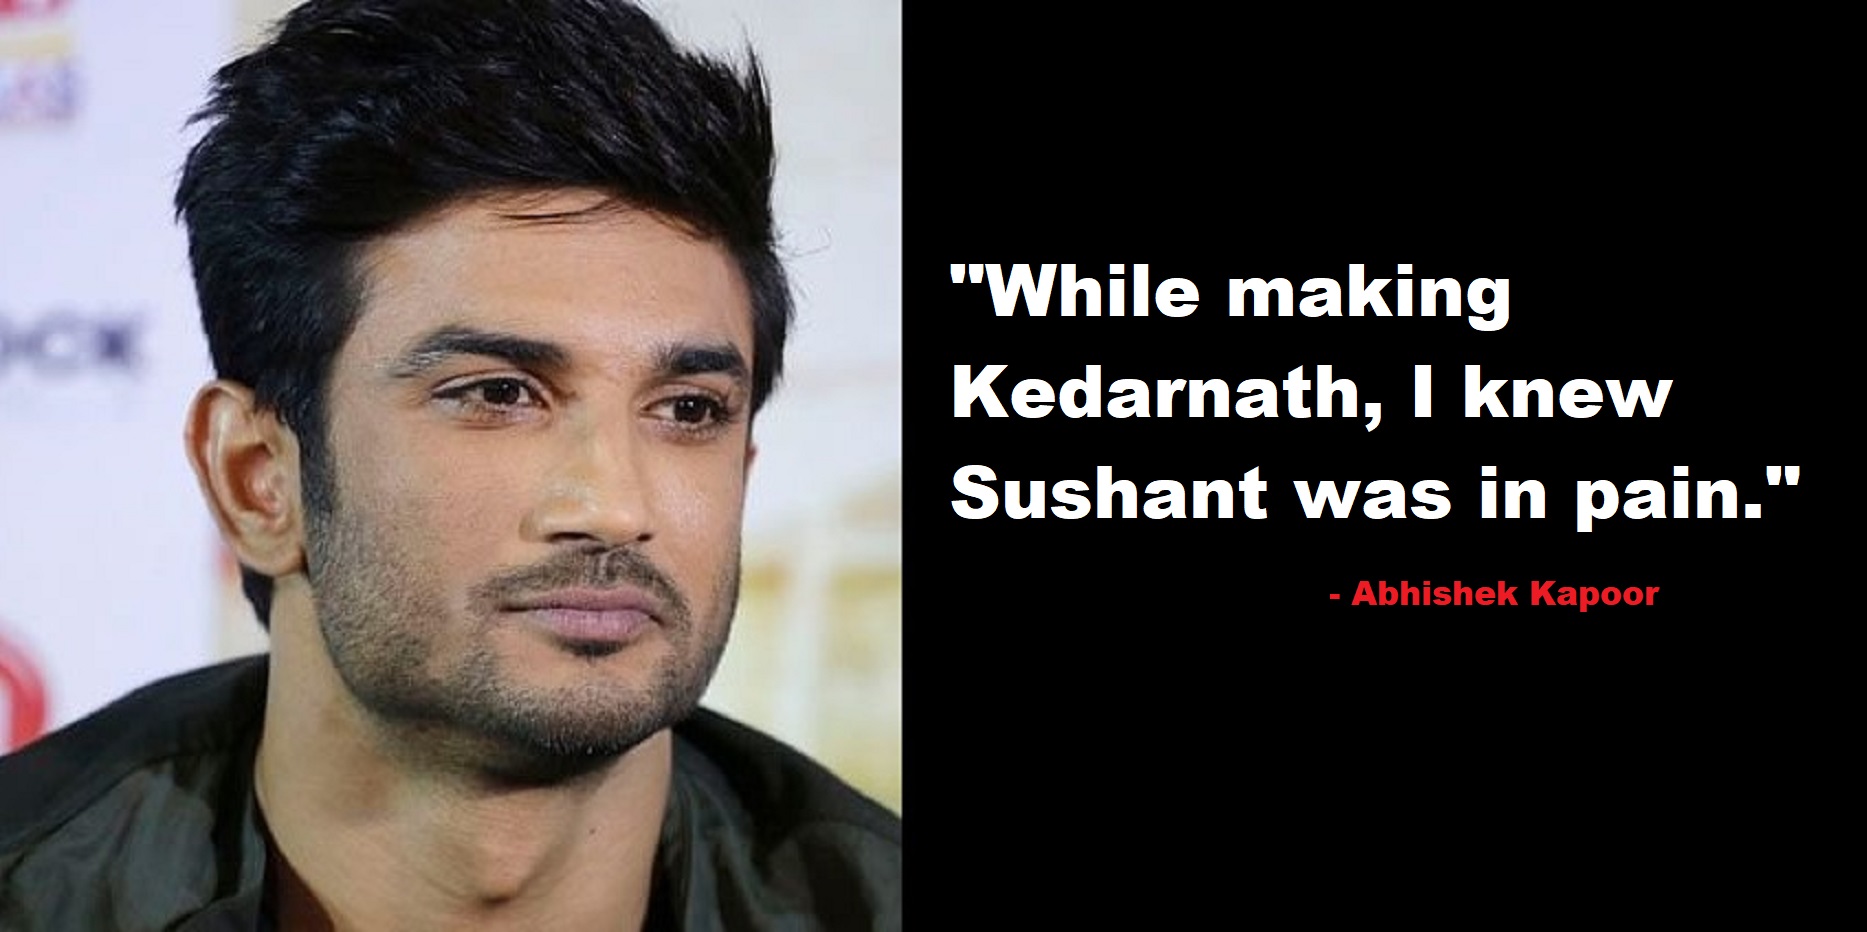 Kedarnath Director Says Investors Backed Out Of Film Saying ‘Sushant Isn’t A Star’ – ‘He Was In Pain’